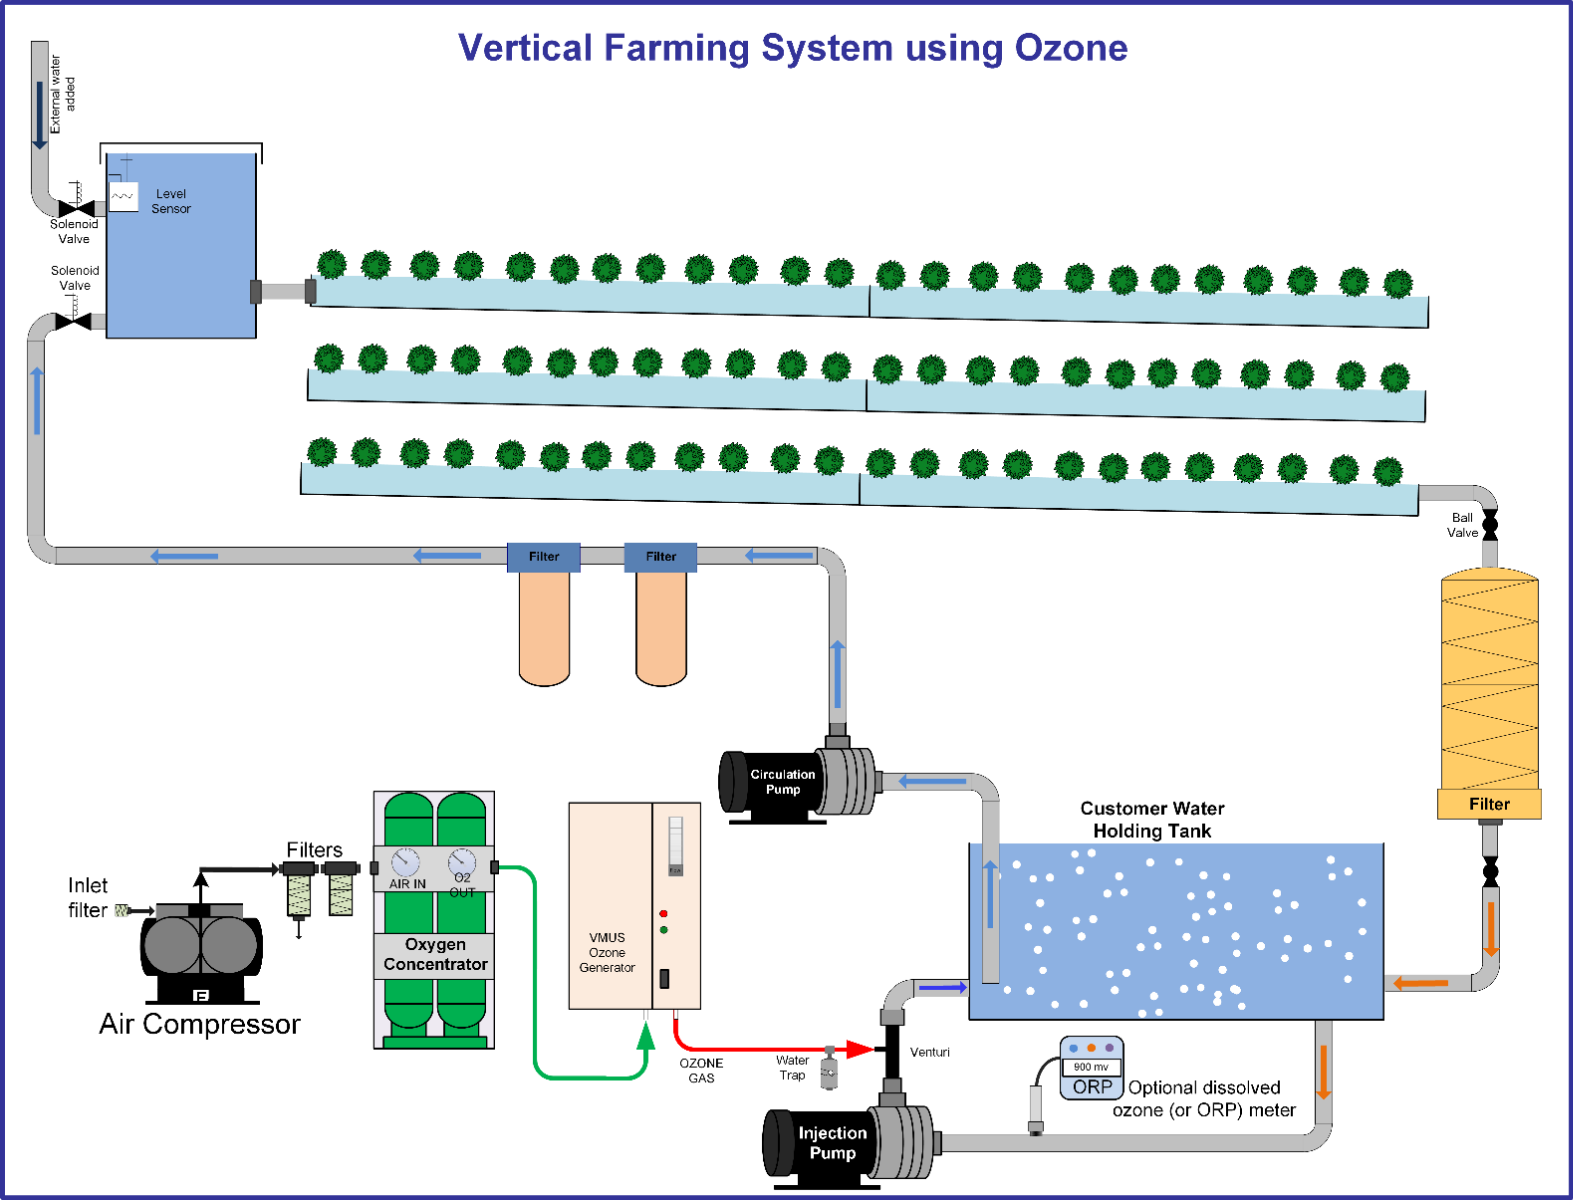 Ozone use in vertical farming applications